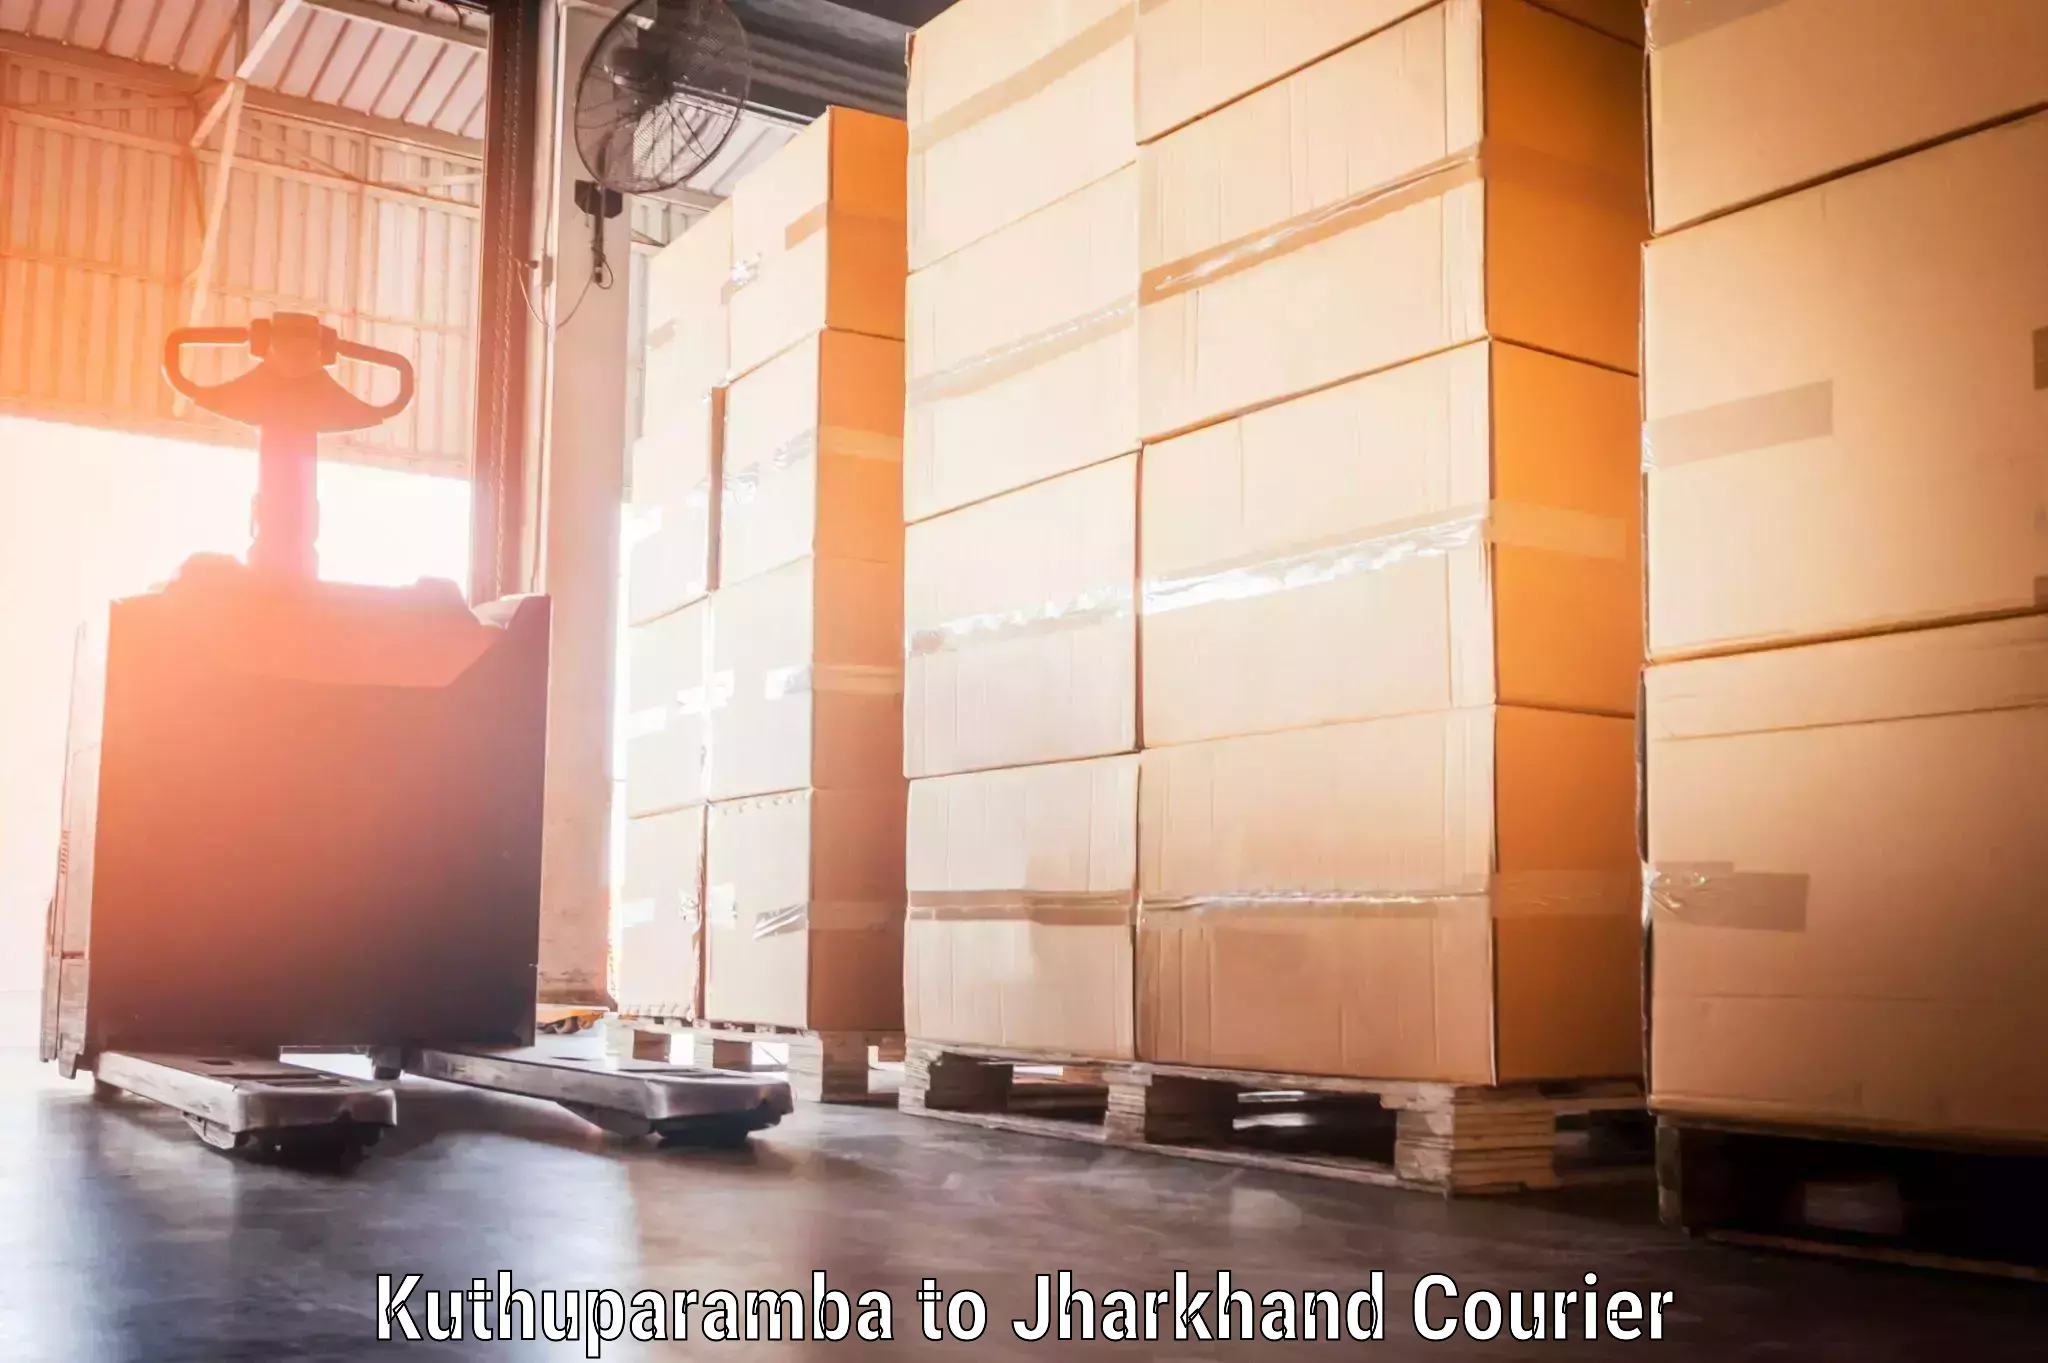 Baggage shipping experience in Kuthuparamba to Jharkhand